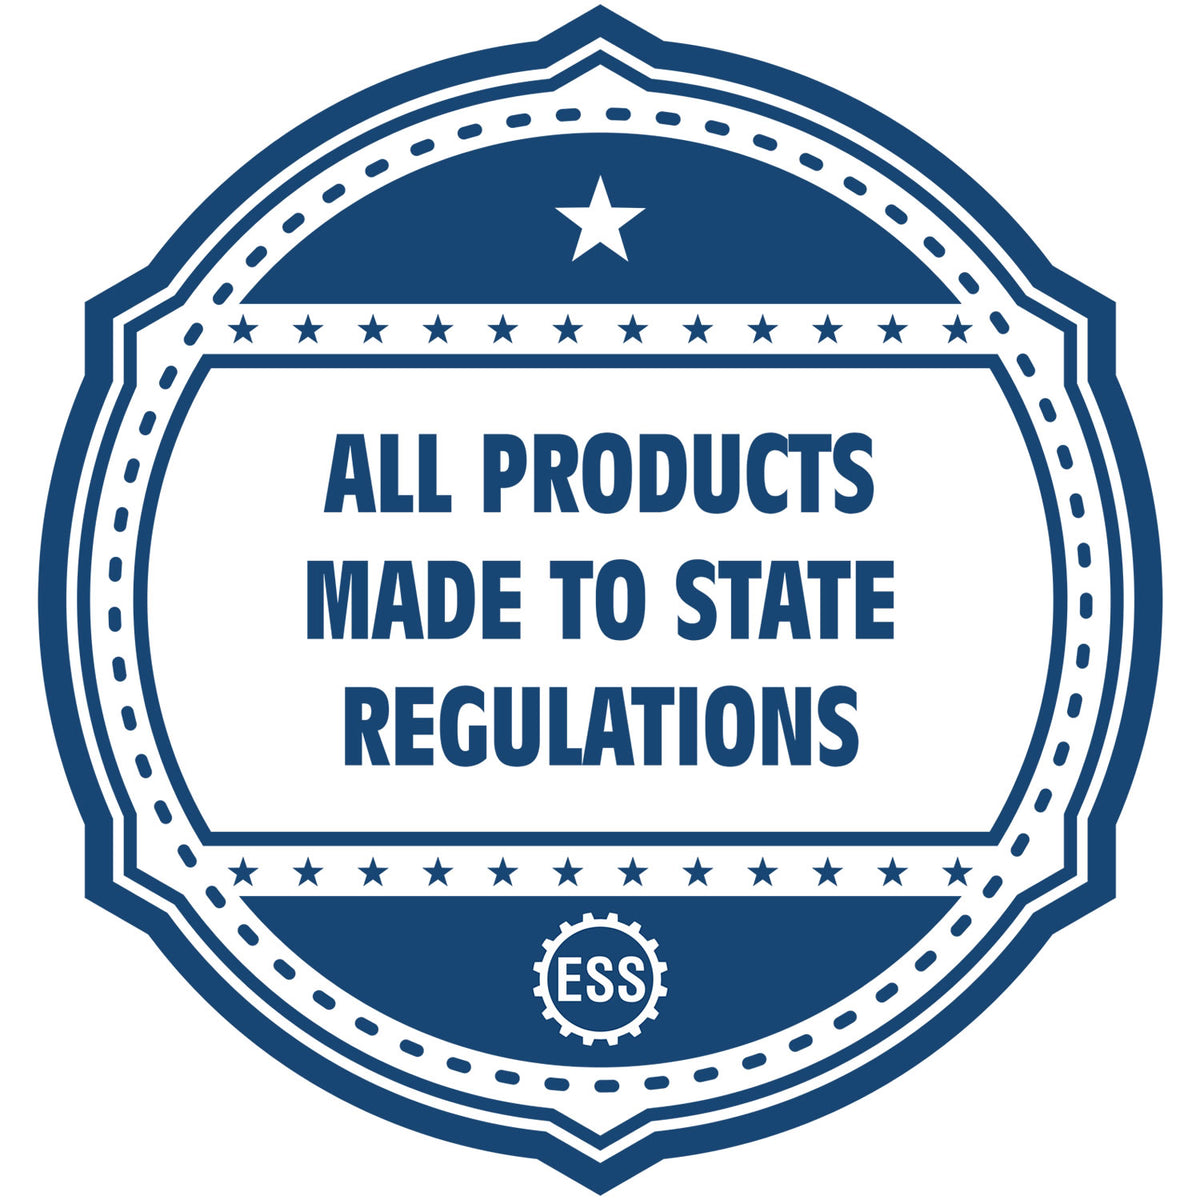 A blue icon or badge for the Soft Ohio Professional Geologist Seal showing that this product is made in compliance with state regulations.